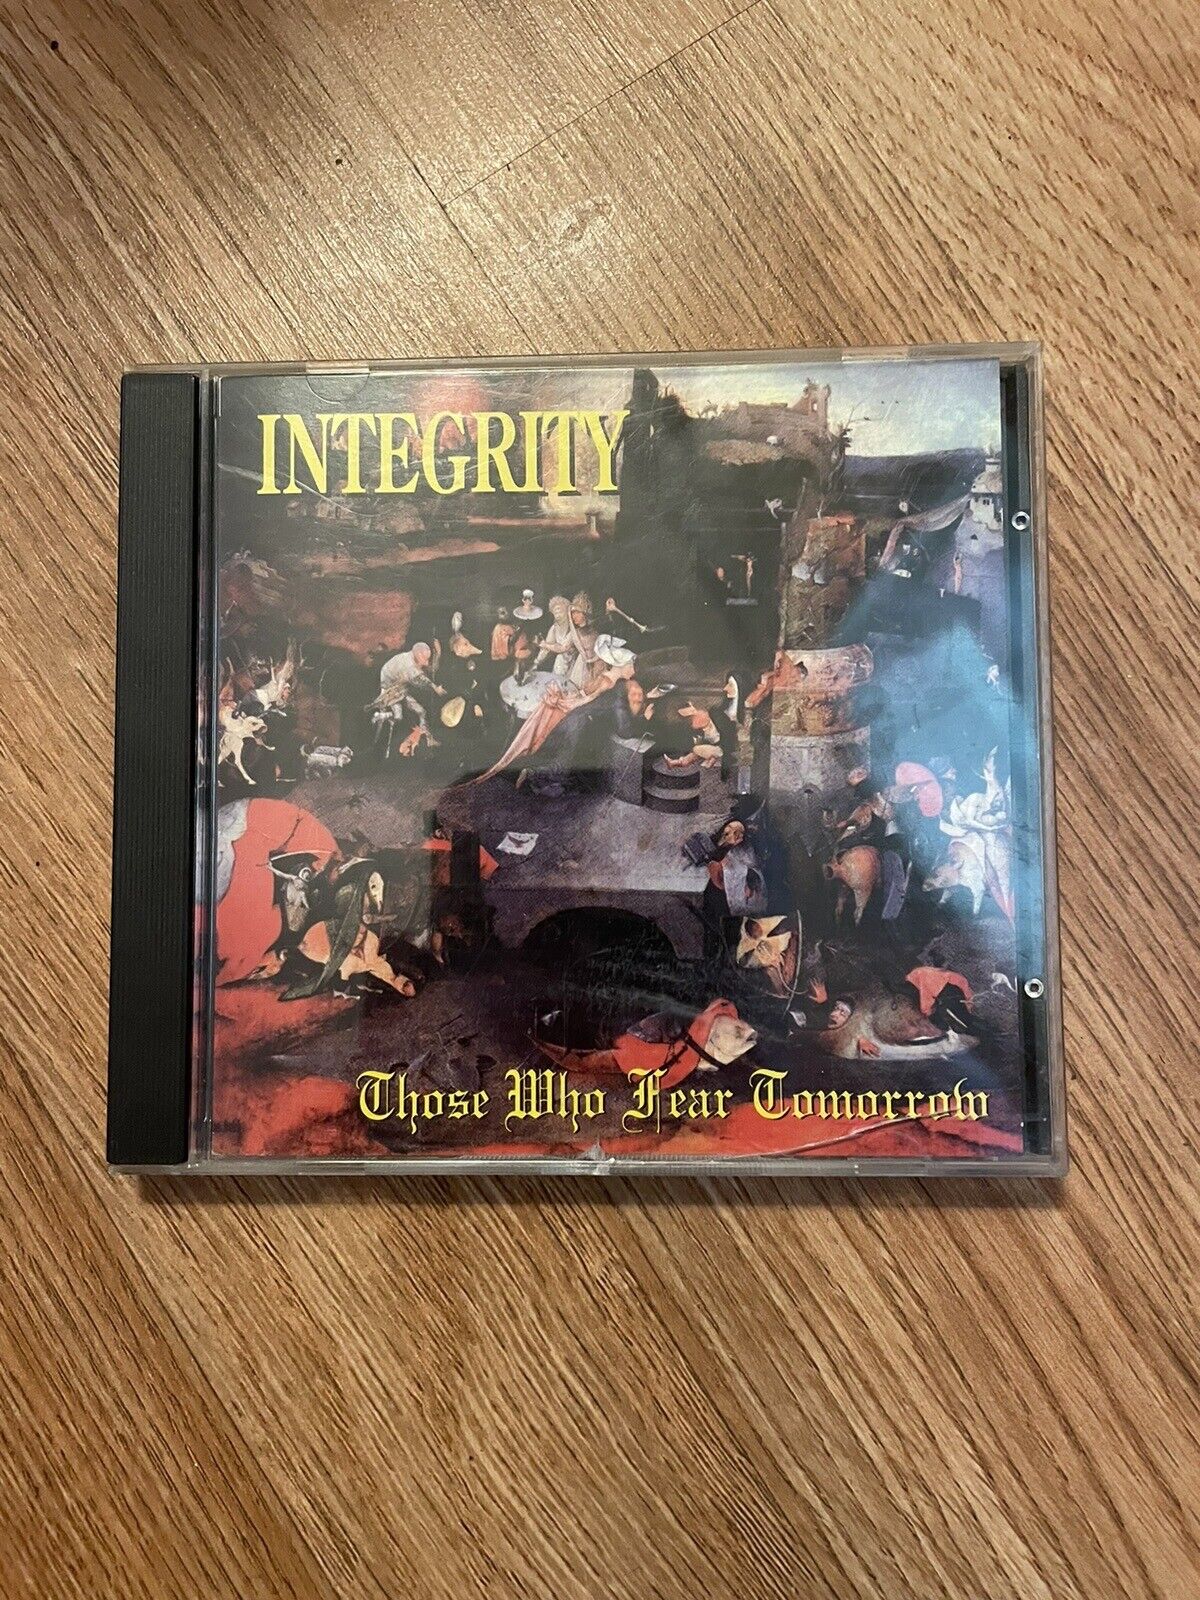 INTEGRITY - Those Who Fear Tomorrow - CD - **Excellent Condition** - RARE